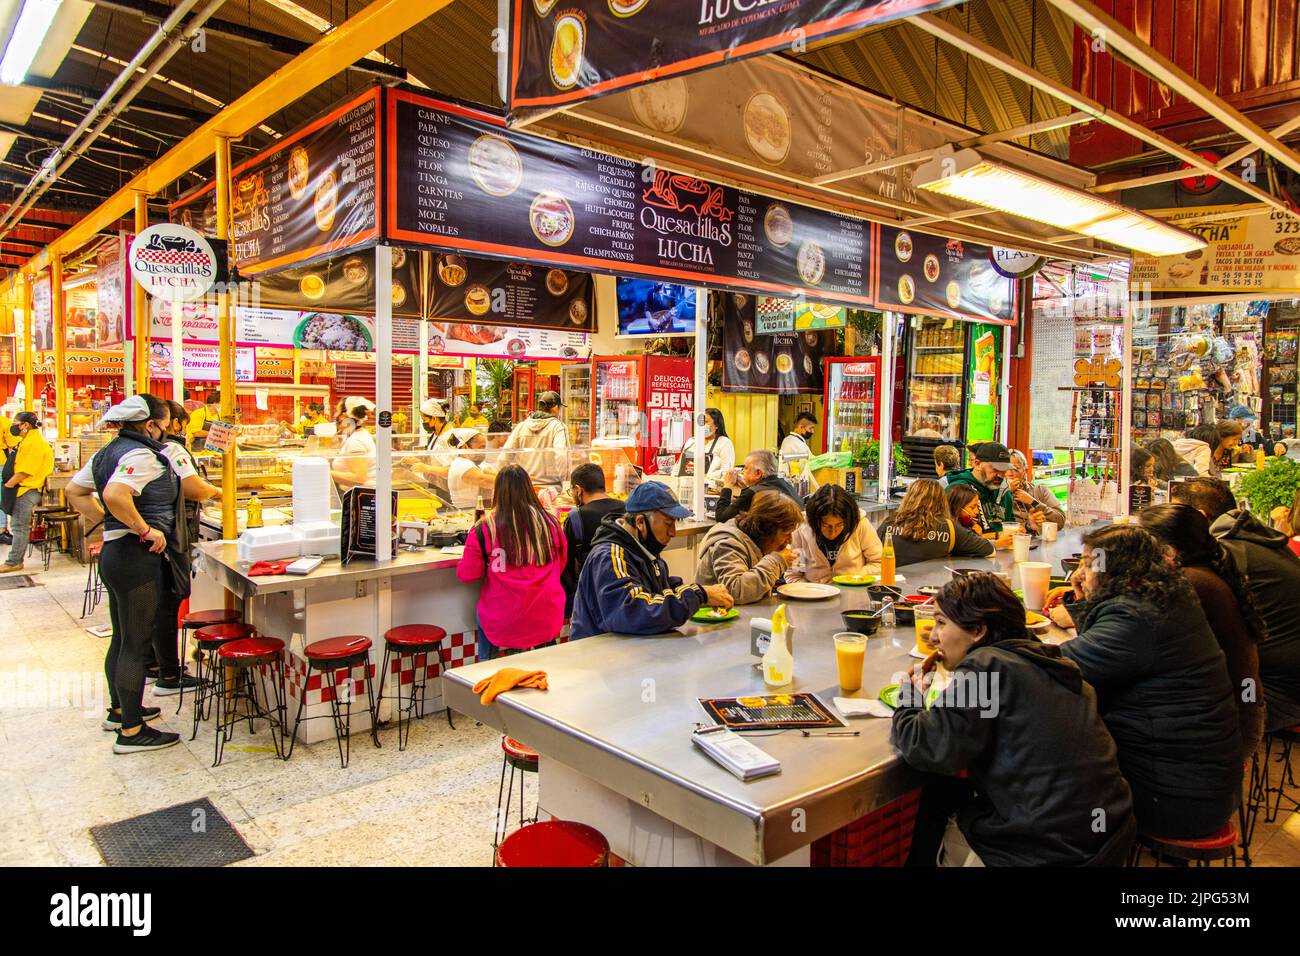 People dining at Coyoacan Market in Mexico City, Mexico Stock Photo